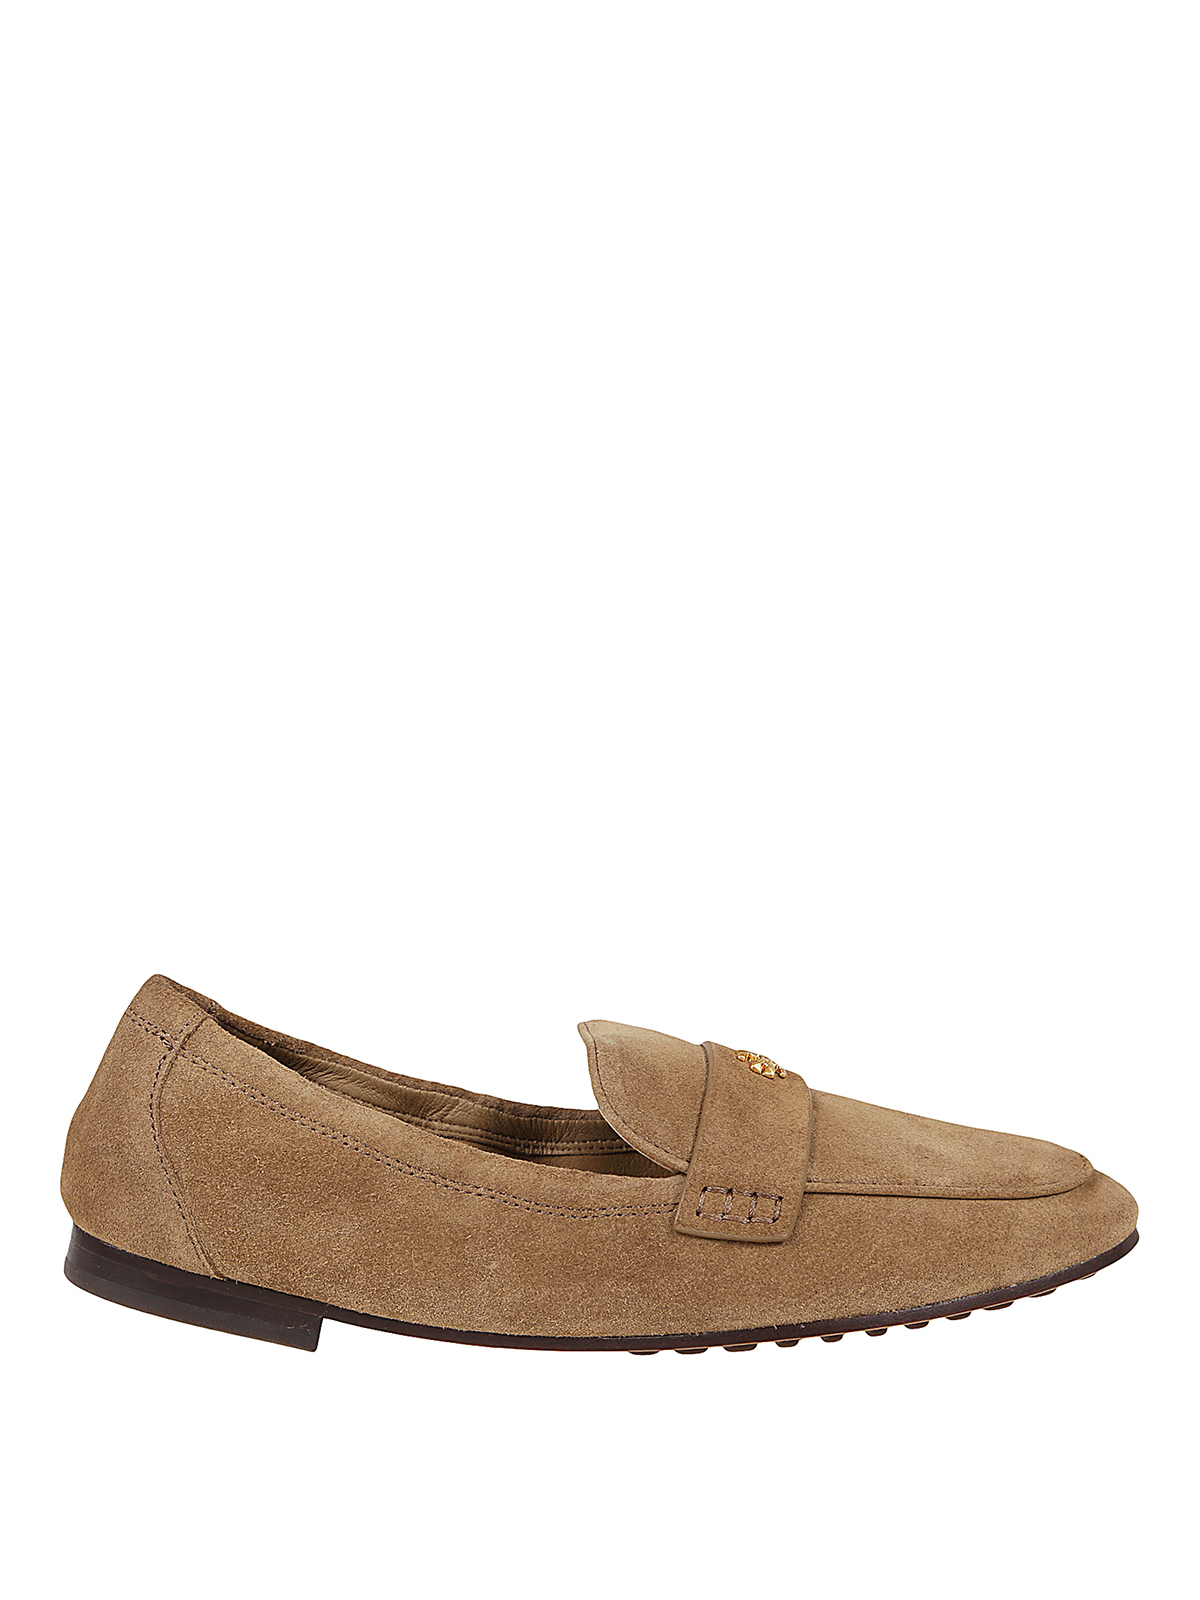 Tory Burch Suede Loafers In Camel